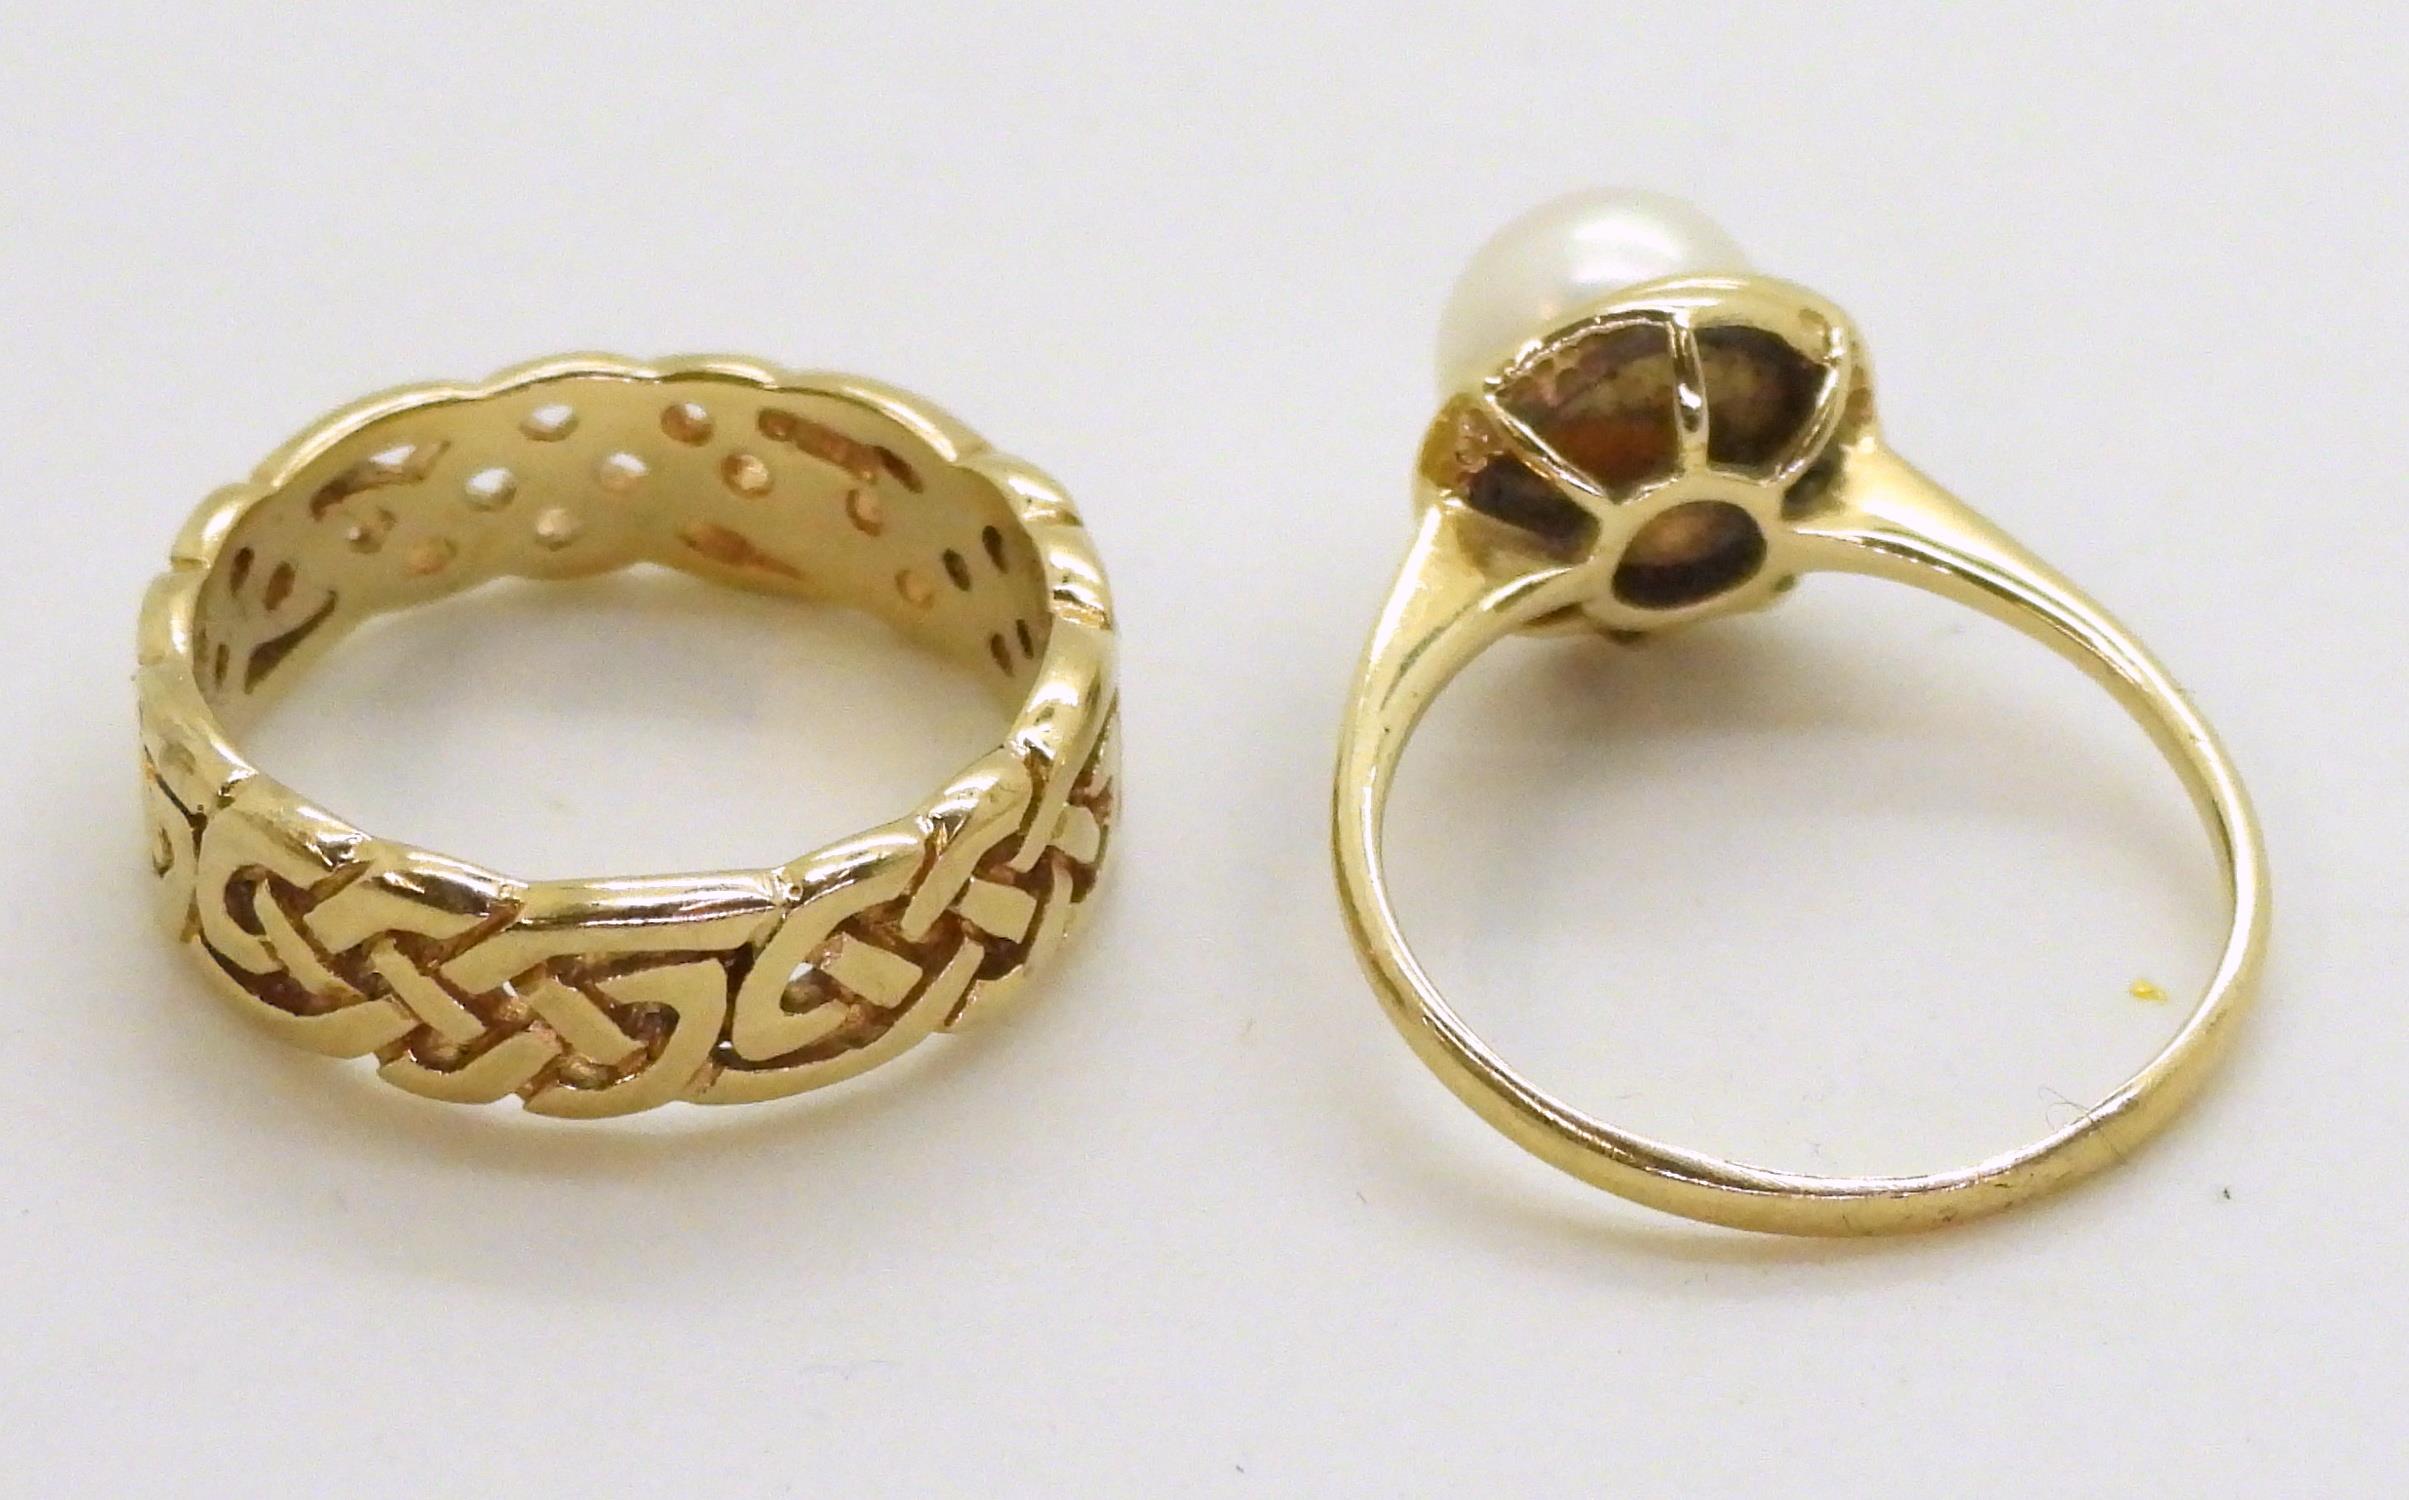 A 9ct gold Celtic knotwork wedding ring, size l weight 3.1gms, together with a 14k gold pearl ring - Image 3 of 3